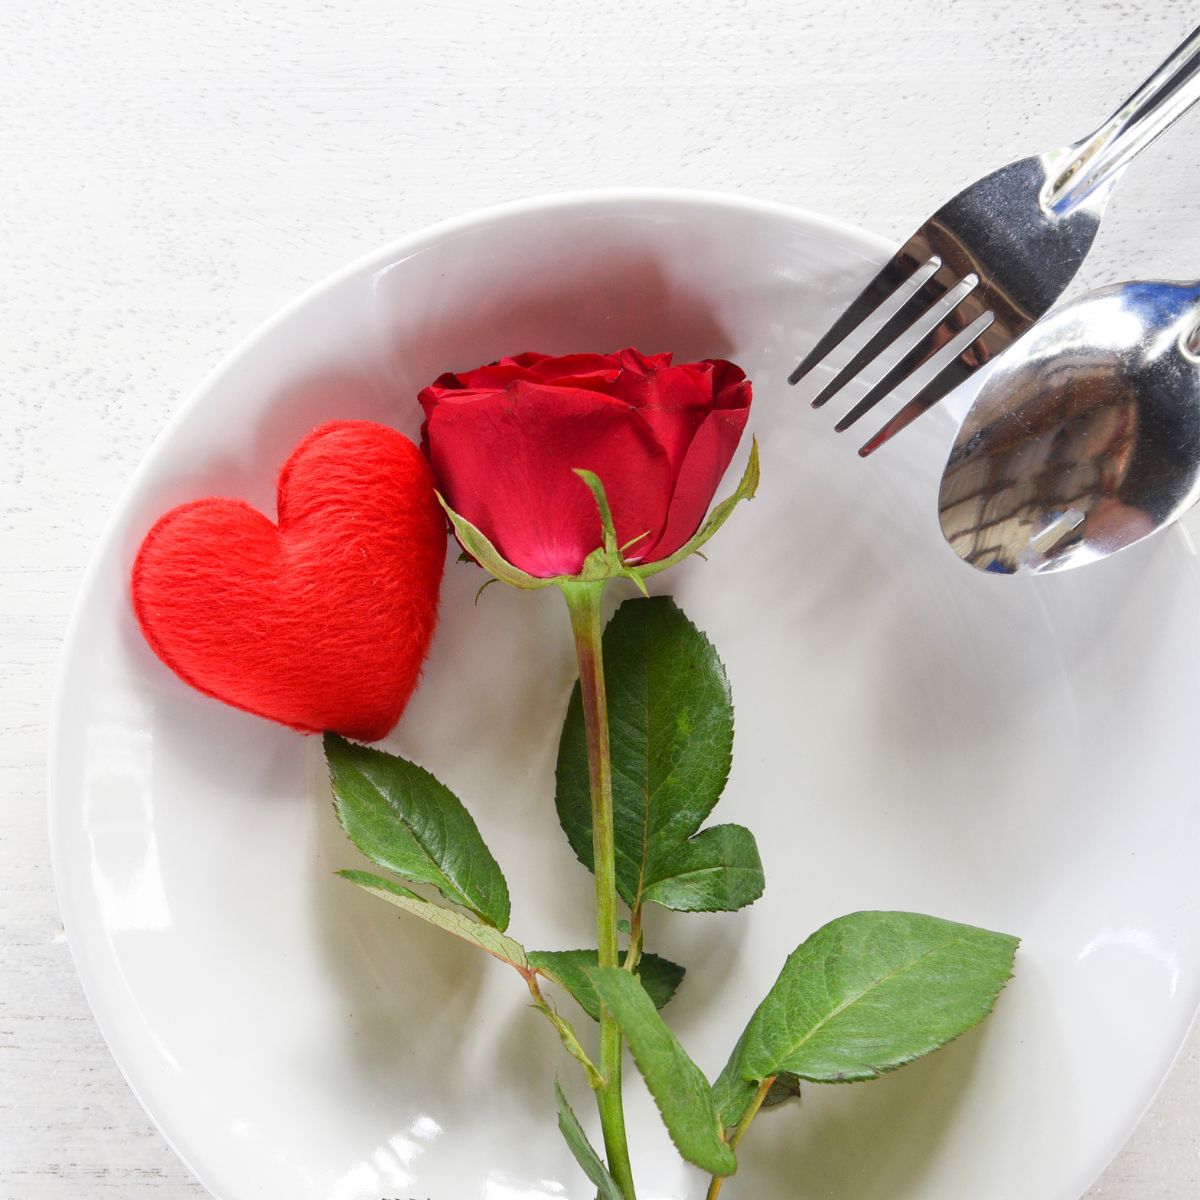 5 Reasons Why You Should Gift EveryPlate for Valentine’s Day